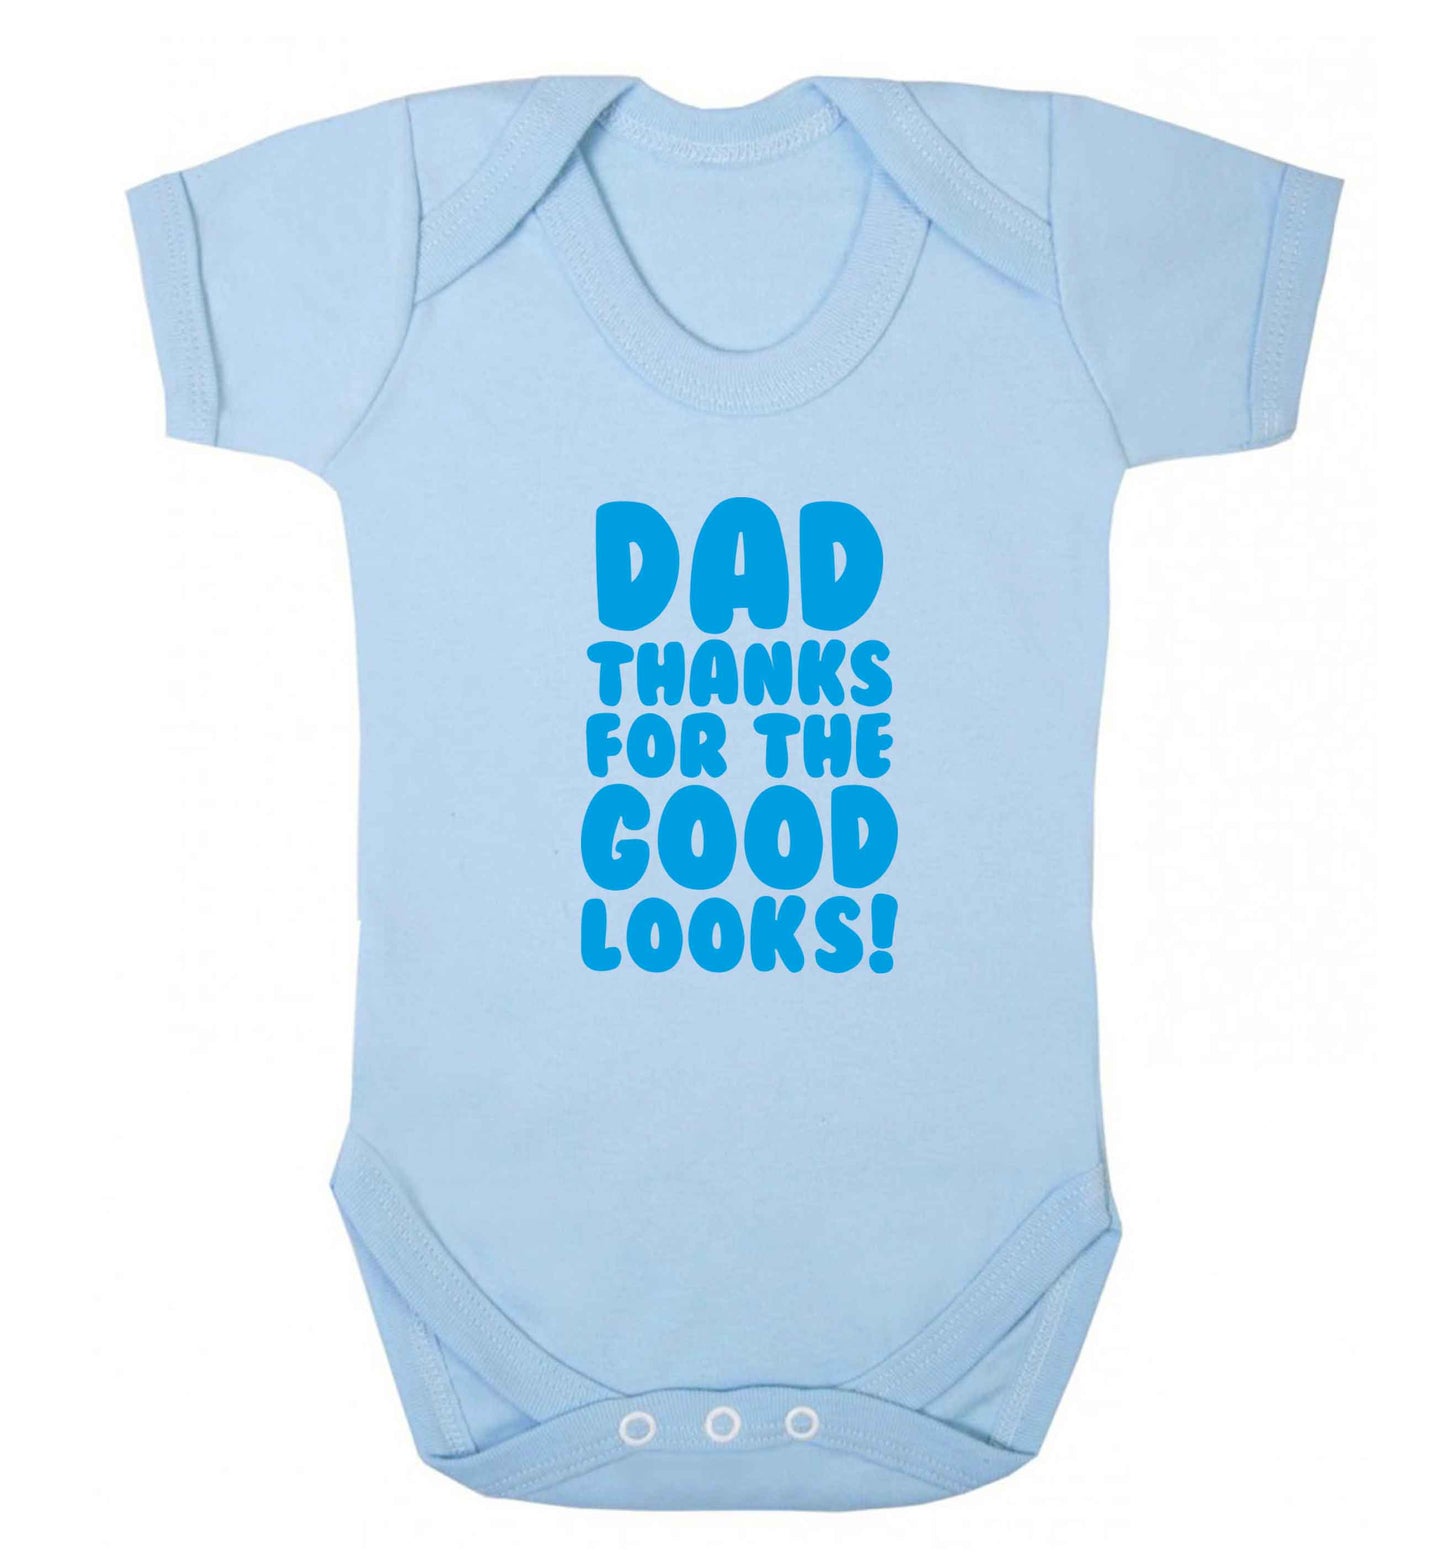 Dad thanks for the good looks baby vest pale blue 18-24 months